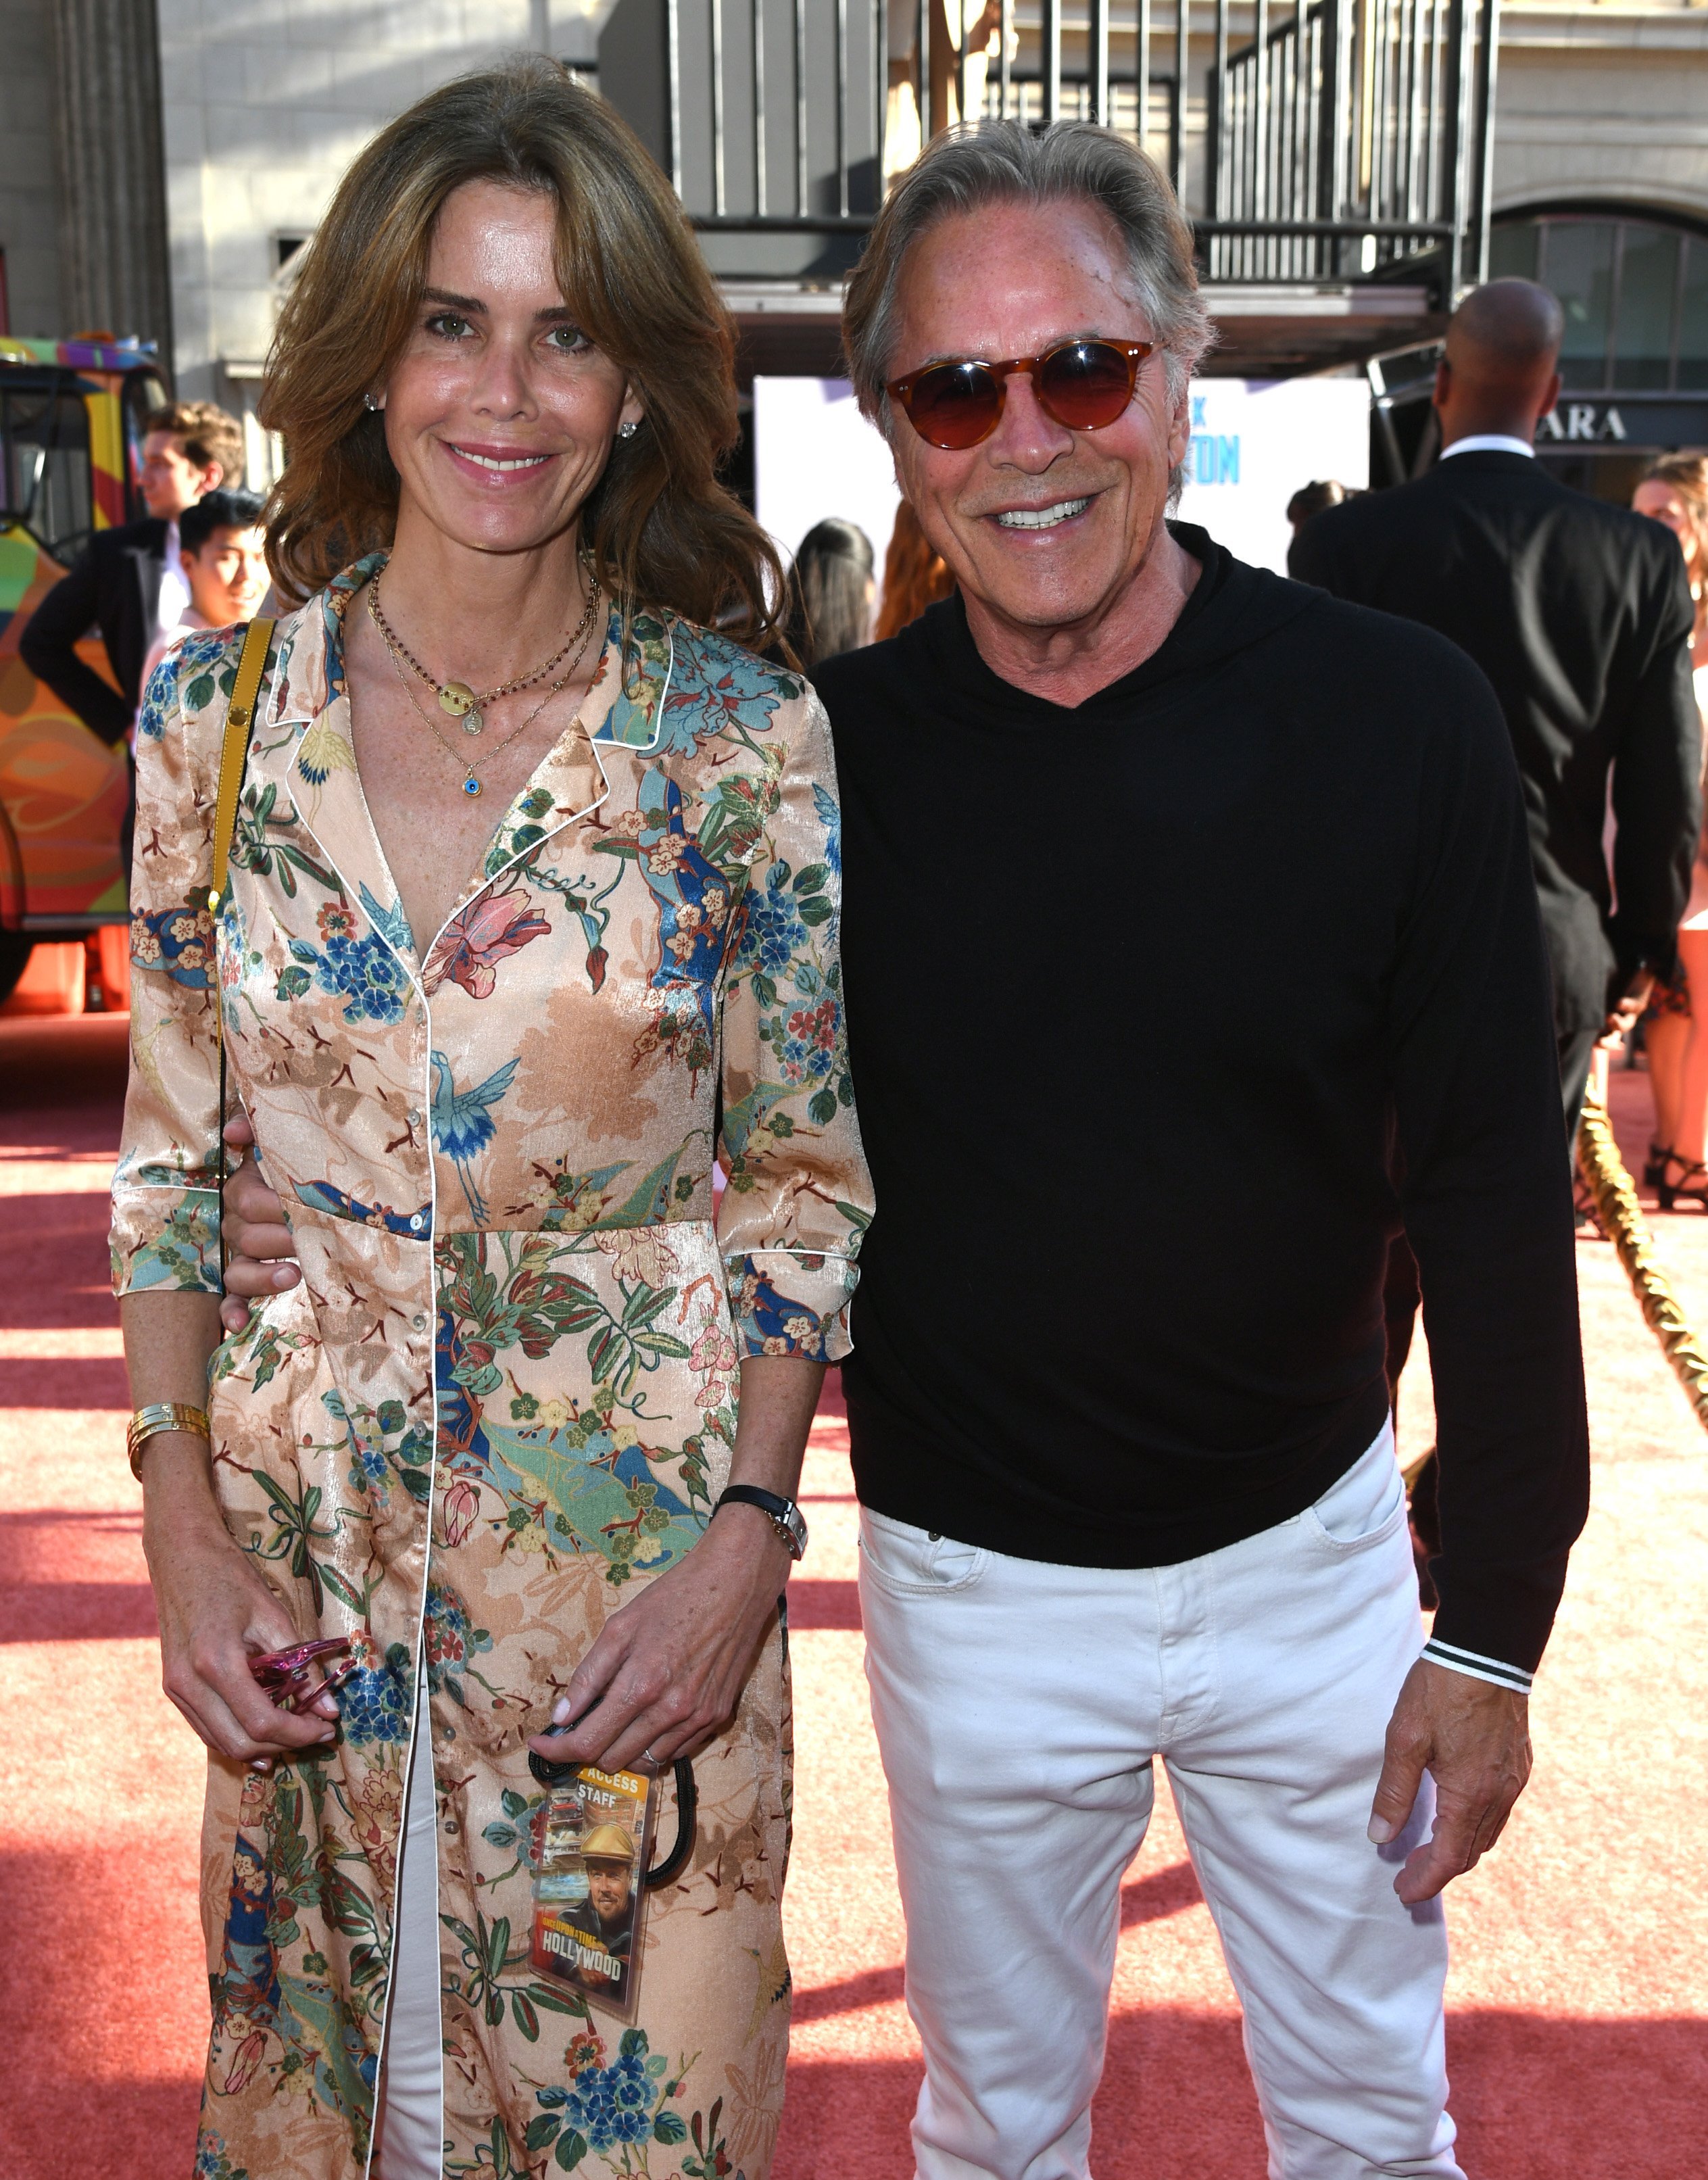 Don Johnson and his wife Kelley Johnson at the premiere of "Once Upon A Time in Hollywood" in July 2019 | Photo: Getty Images